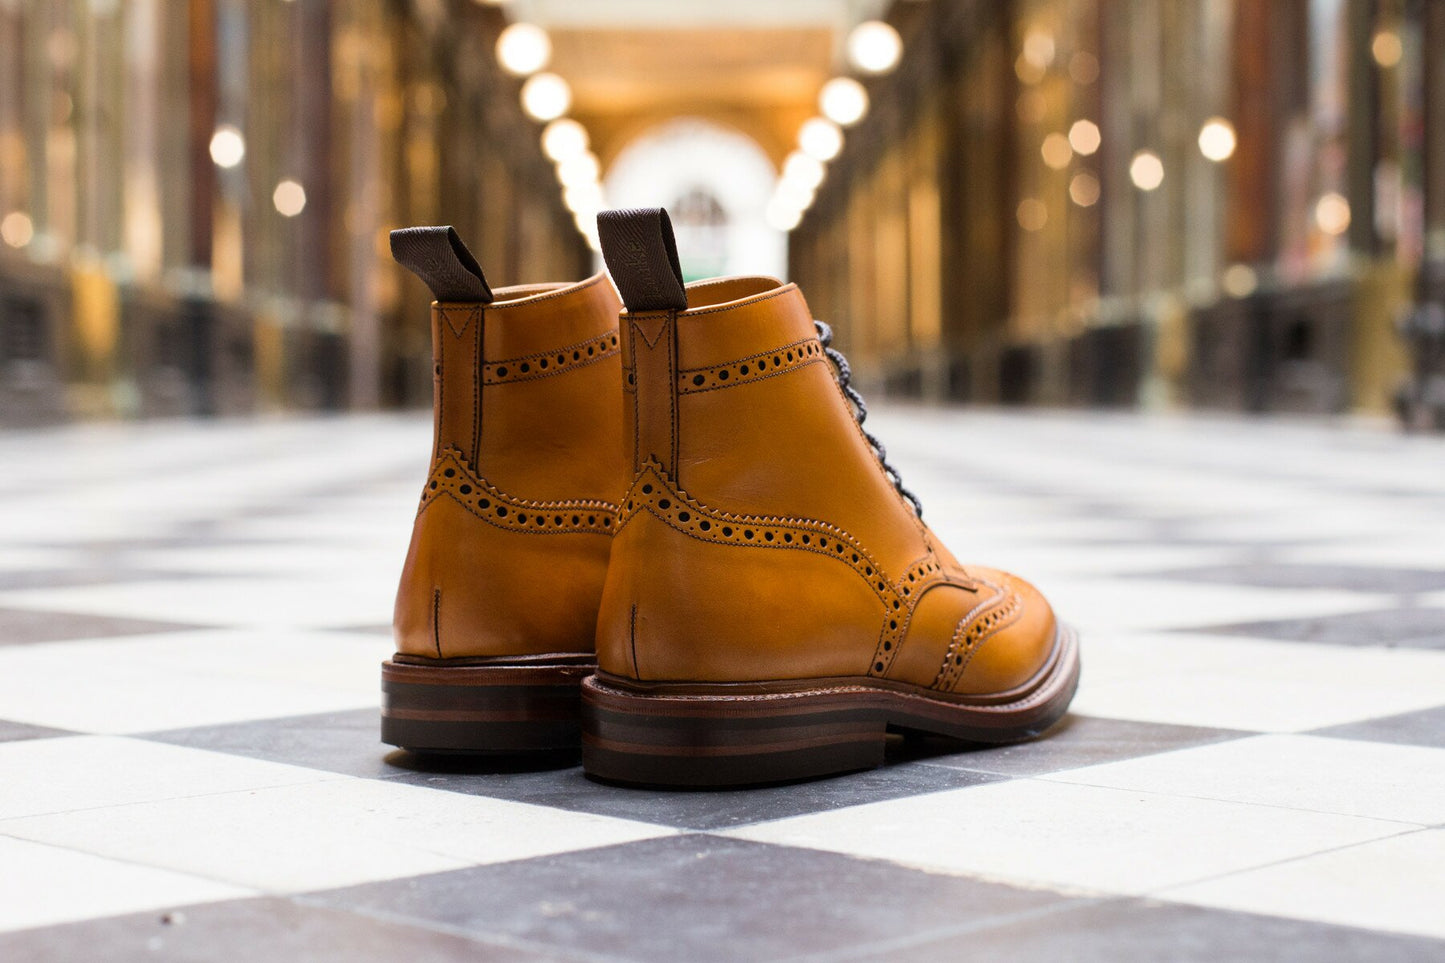 Loake - Boots cuir tan semelle gomme cousue goodyear